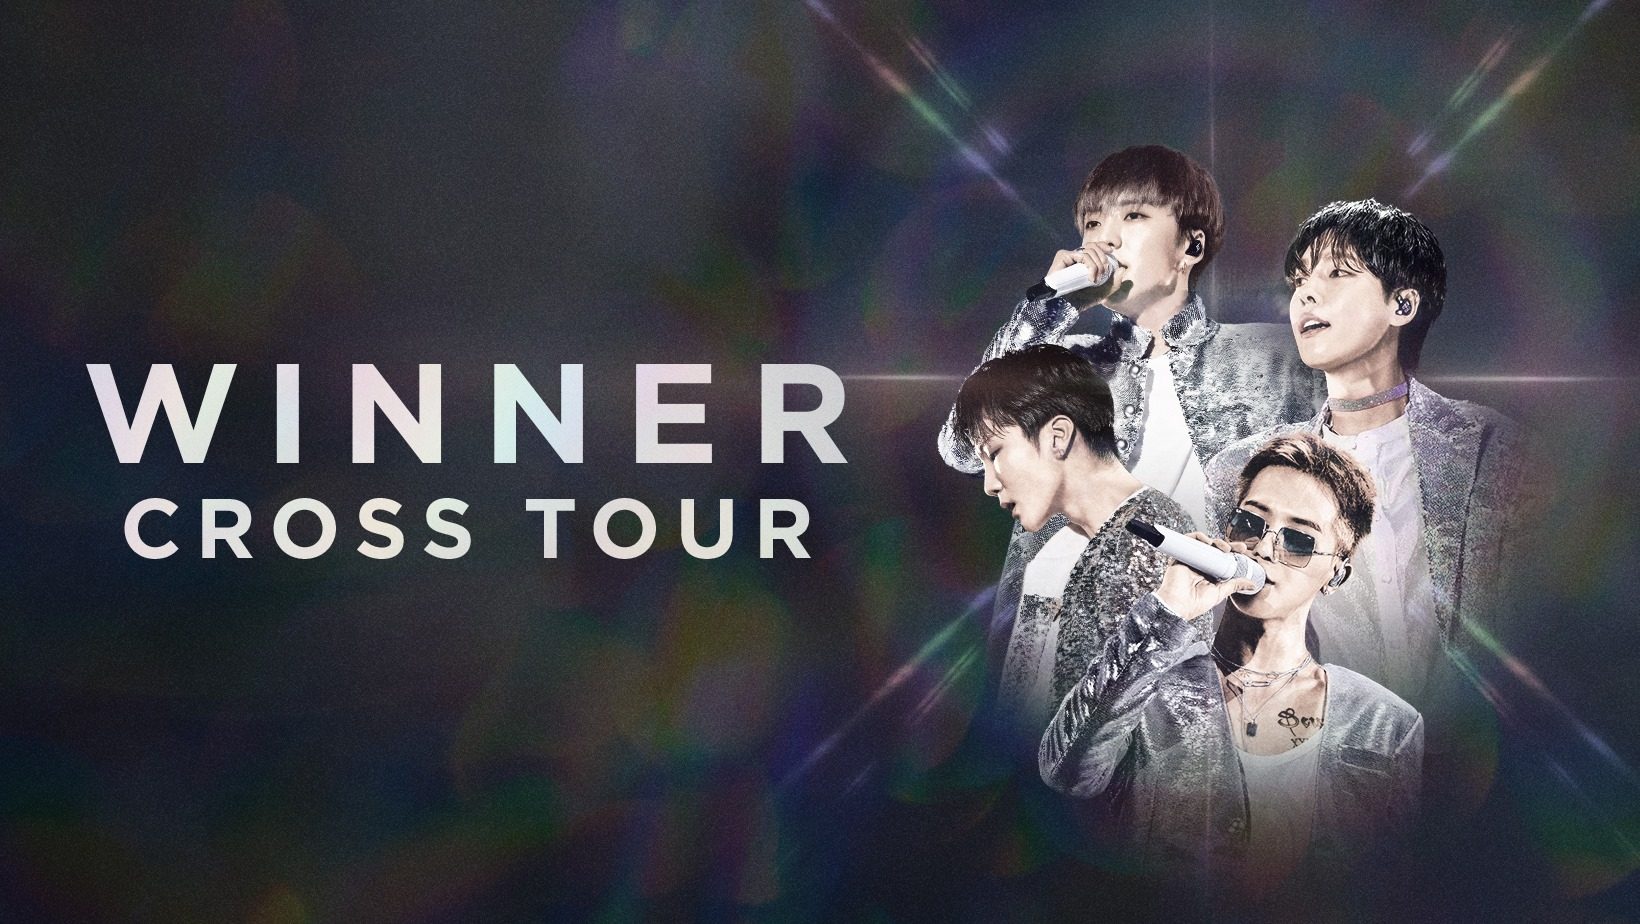 WINNER is coming back to Manila in 2020